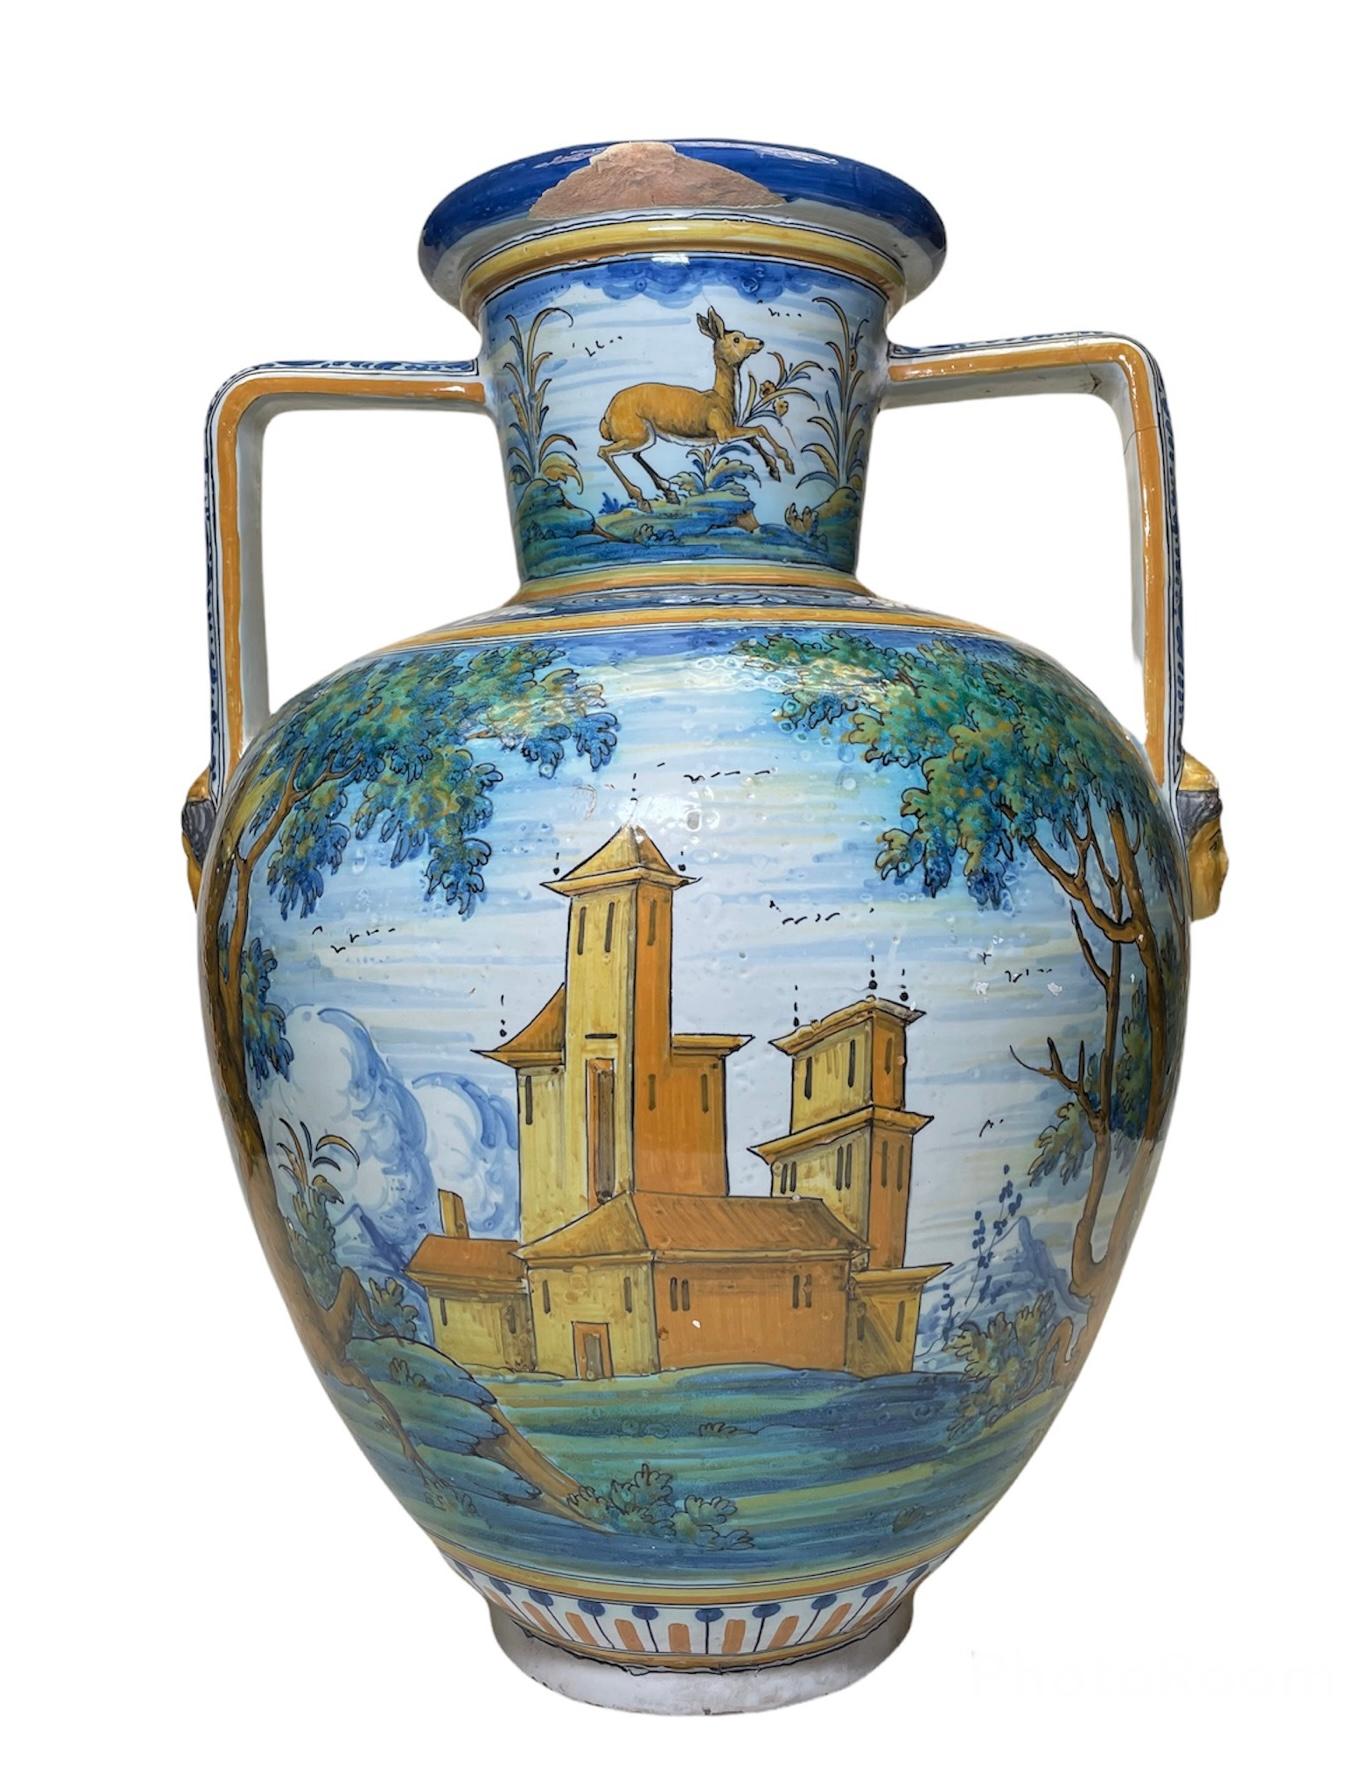 This is a Talavera Majolica large amphora/ urn vase. It is hand painted in the belly with a scene of a country background with a musketeer riding a horse in one side and a country church or monastery in the other one. The neck is hand painted with a